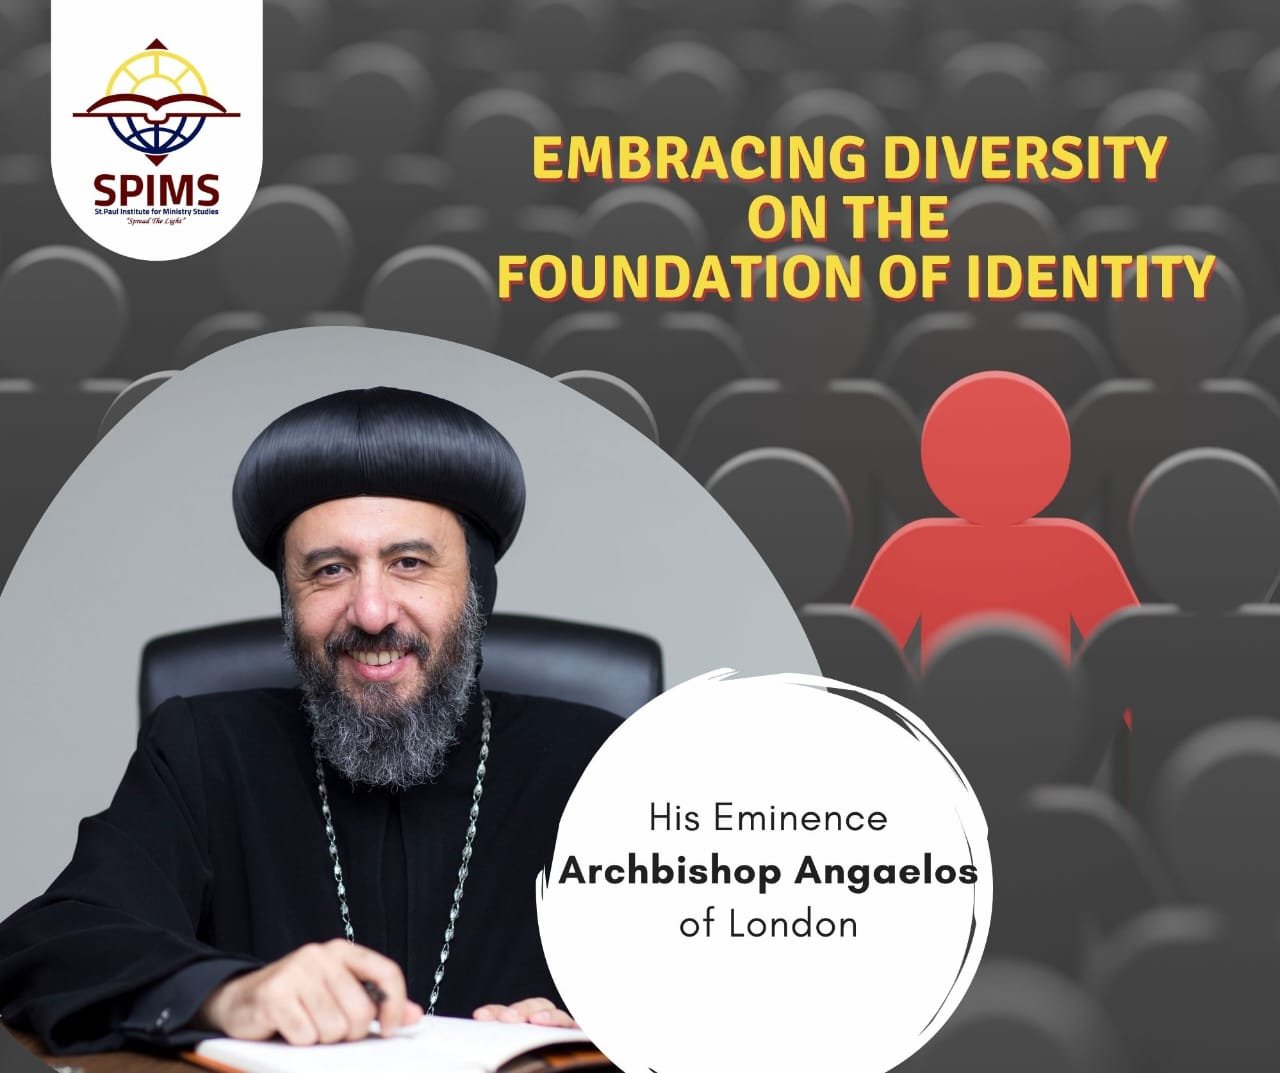 Embracing Diversity on the Foundation of Identity